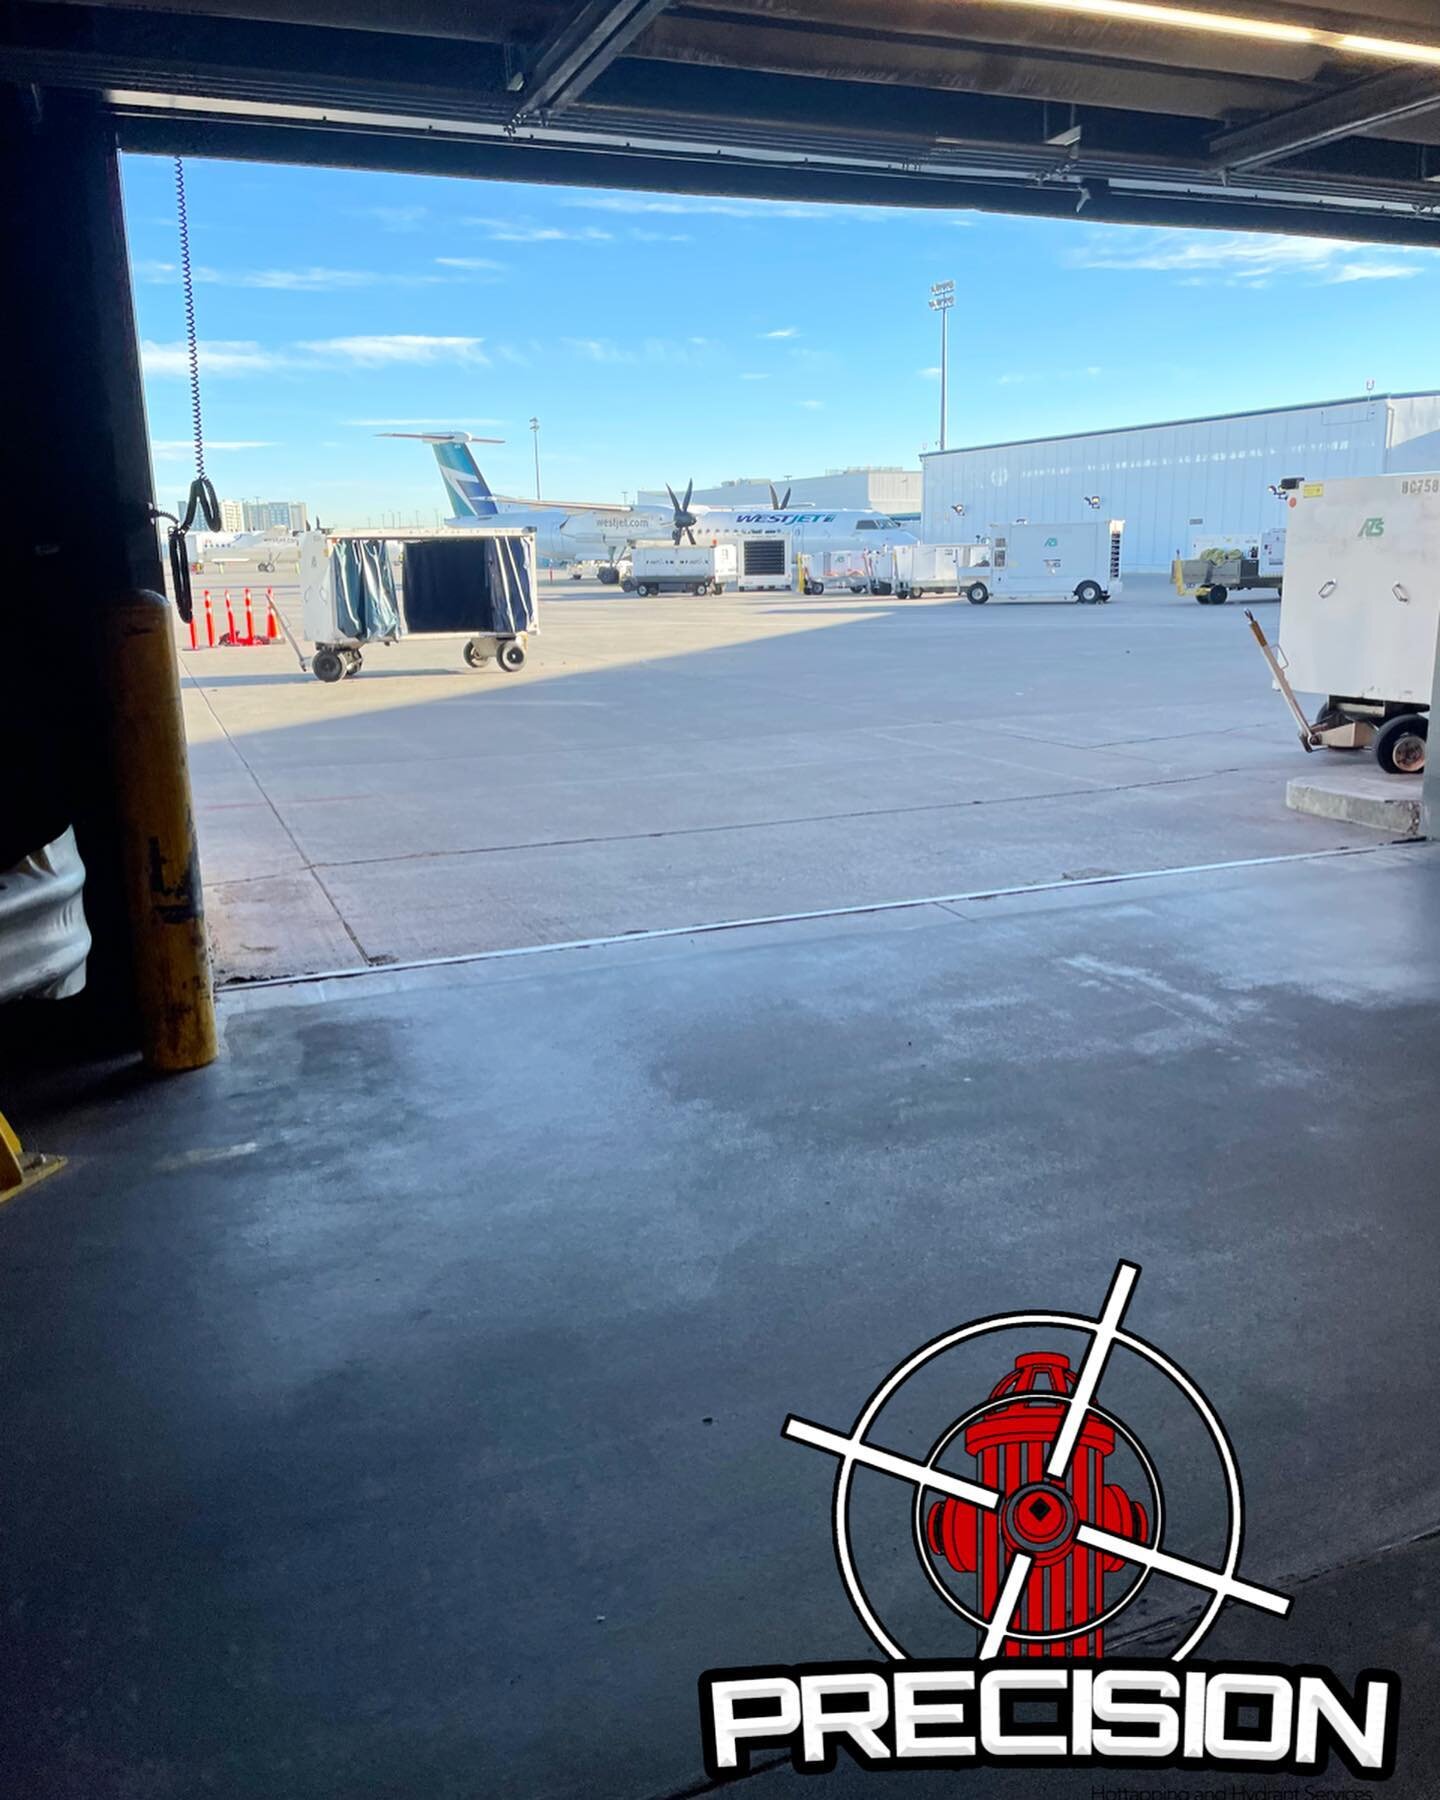 Beautiful day at the @fly_yyc airport. Thank you to all of our summer supporters, we have much more to come!

#hottapping #plumbing #construction #trucks #hydrant #fyp #yyc #alberta #f4f #work #britishcolumbia #saskatchewan #hvac #clow #smith-blair #